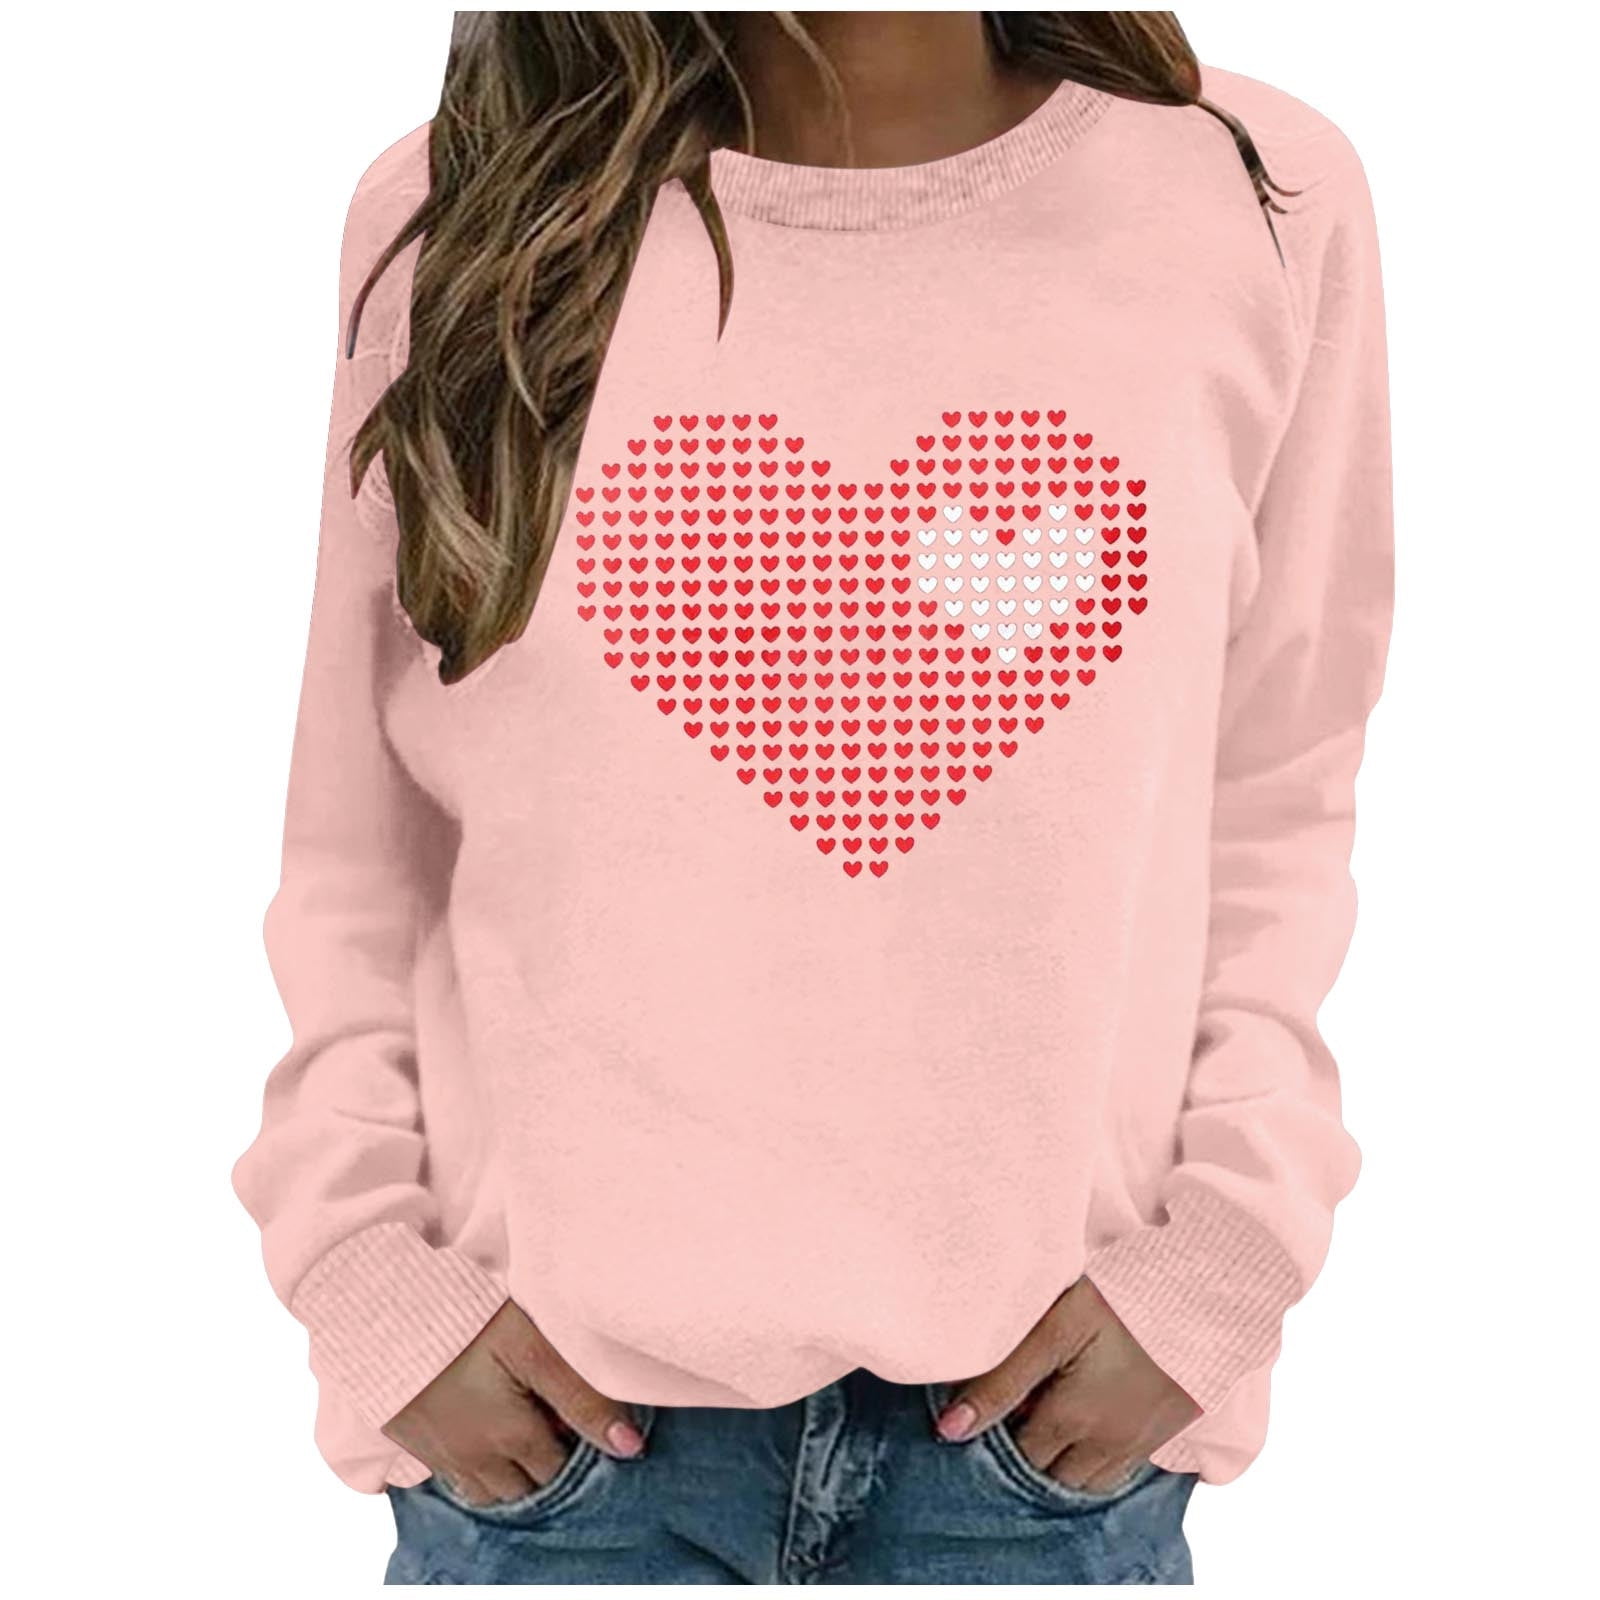 Miekld graphic hoodies Warmest Holiday Sweatshirts For Women Valentine  Shirt Warm Sweaters For Women clearance items under 1.00 outlet stores  clearance at  Women's Clothing store